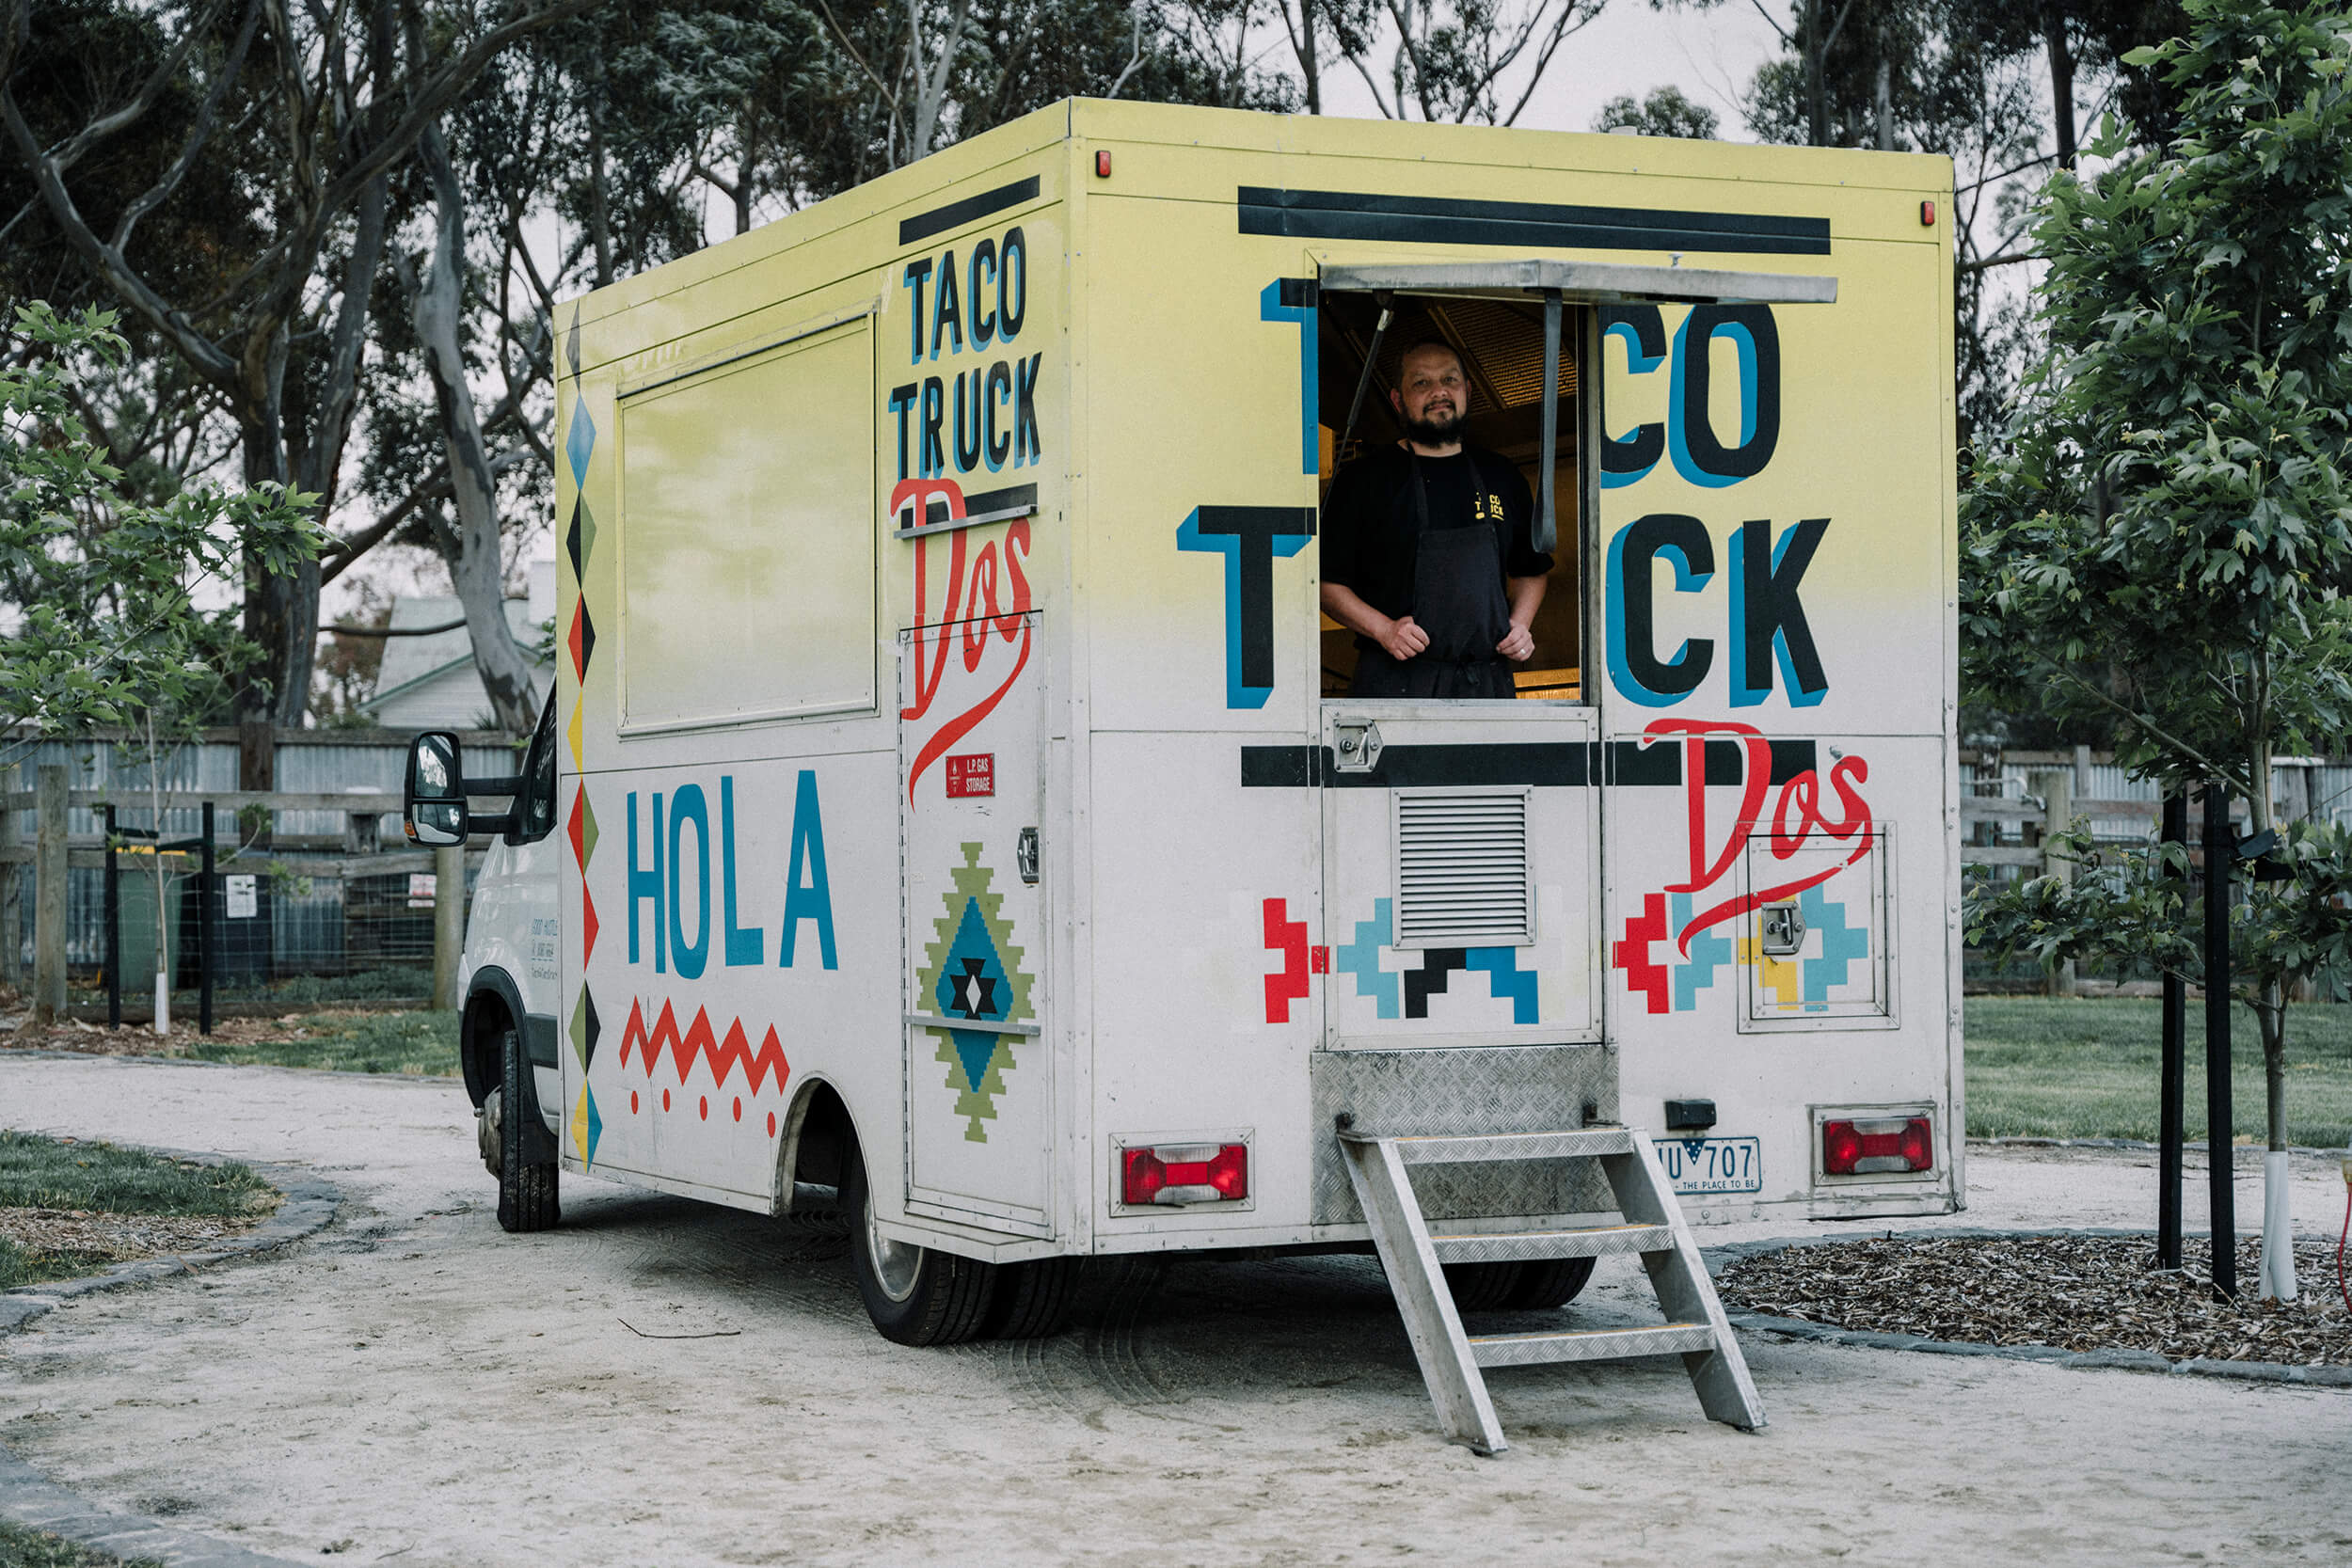 Finding the right wedding suppliers, Taco truck was ready for the guests of the couple, captured by Black Avenue Productions